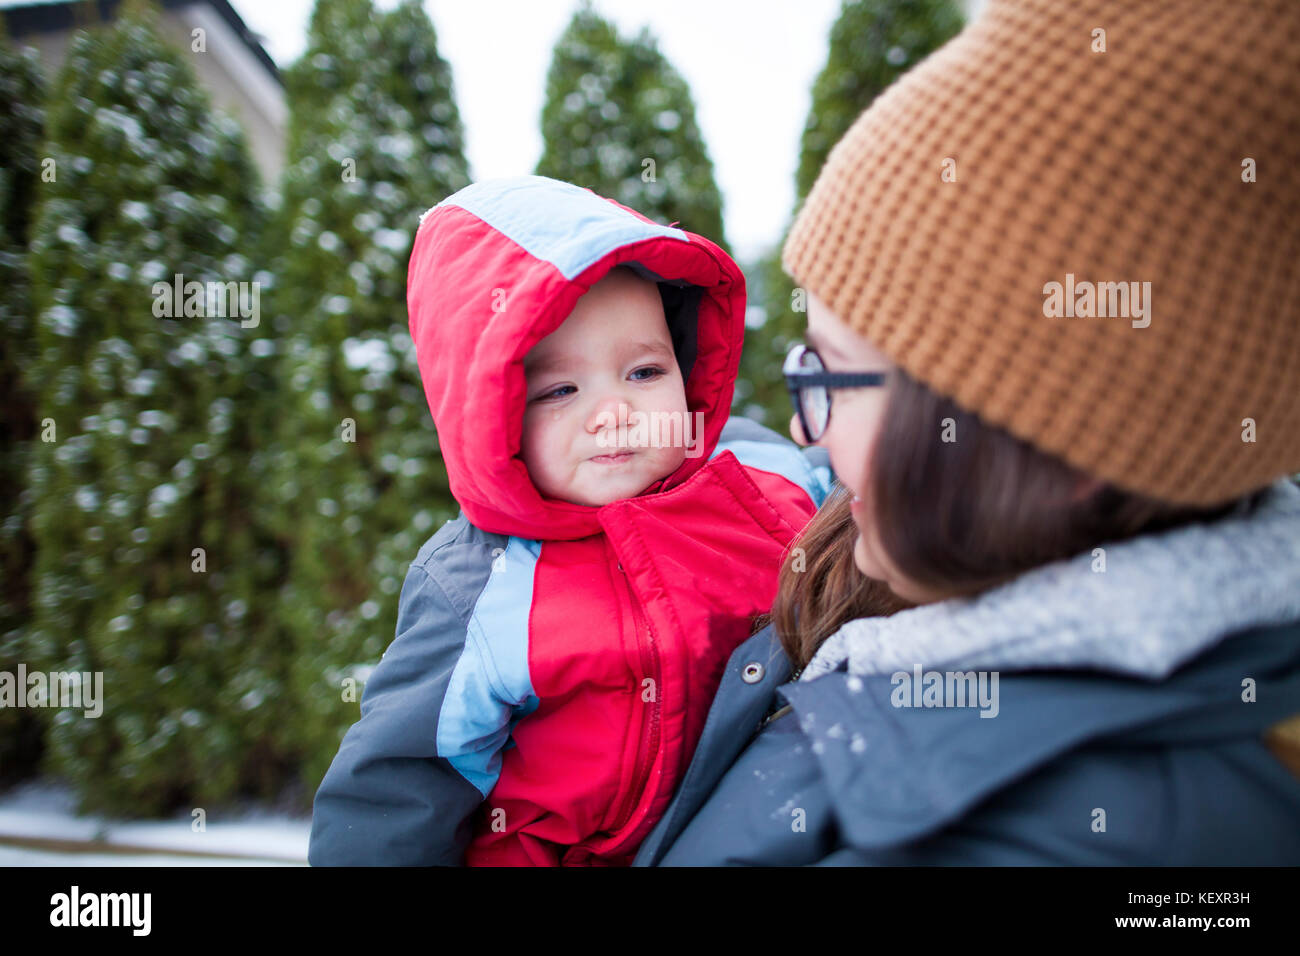 Mother holding baby outdoors in winter while wearing warm clothing, Langley, British Columbia, Canada Stock Photo